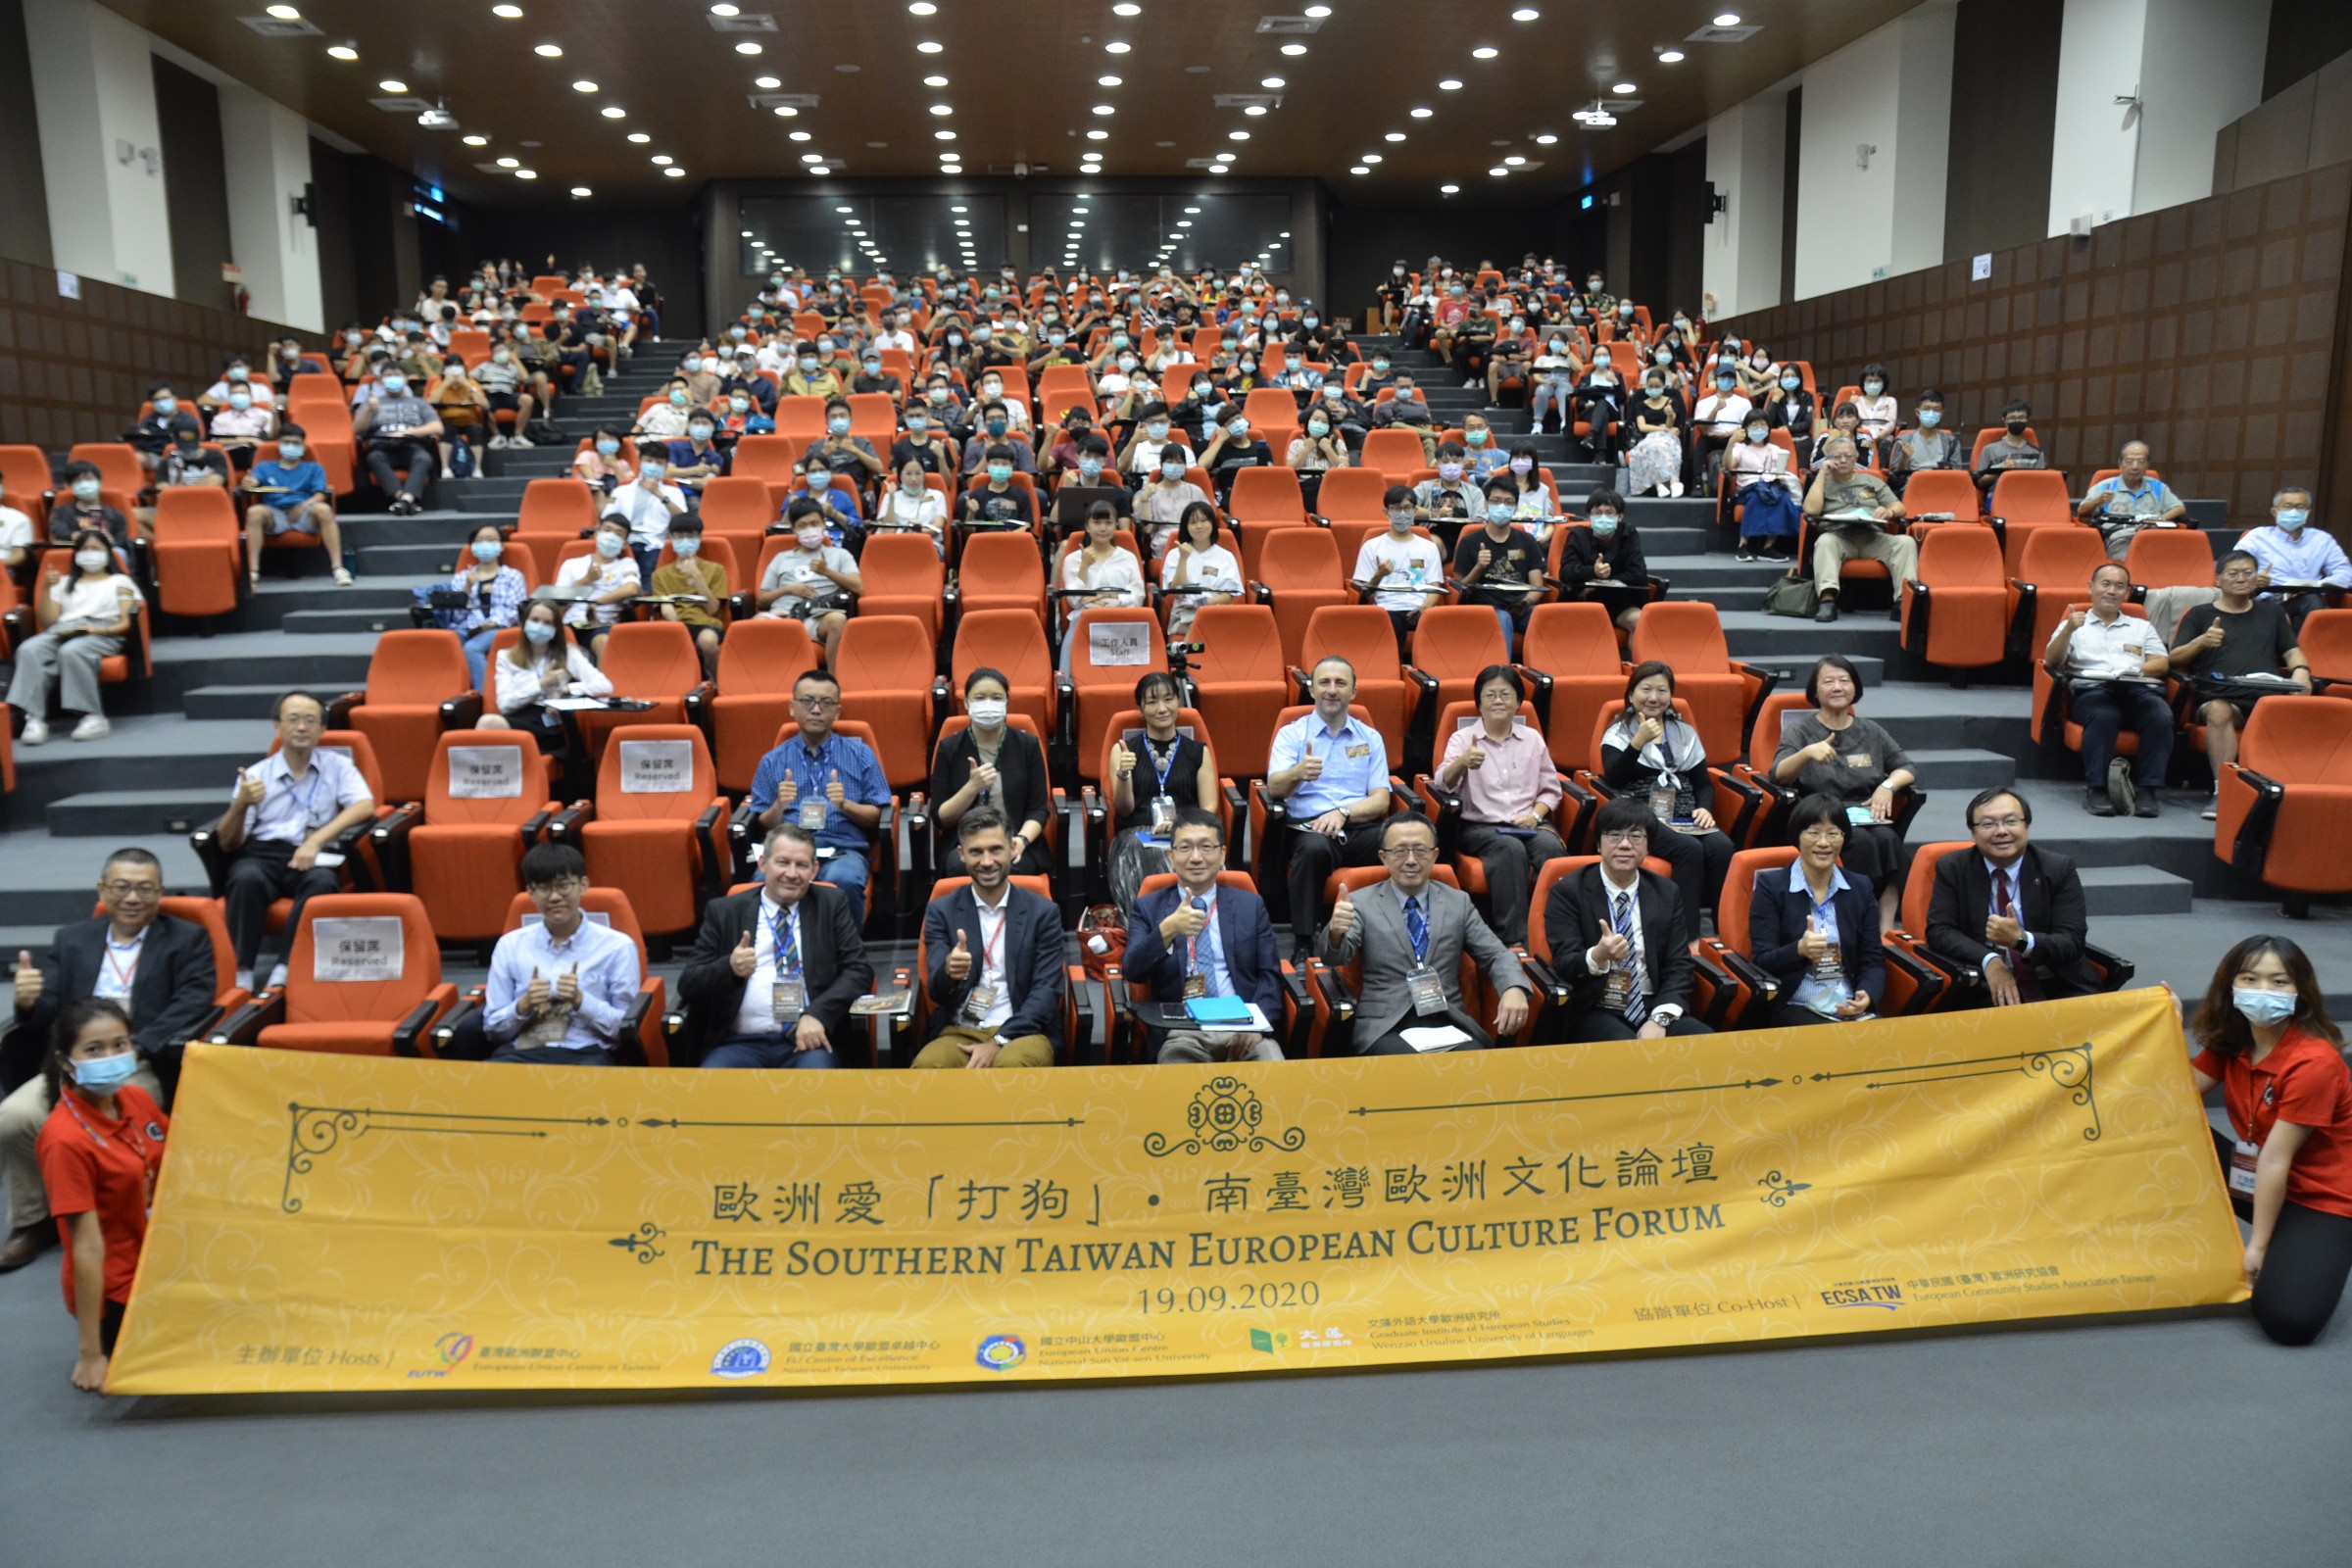 European Union Center organizes The Southern Taiwan European Culture Forum to share urban development trends, arts, and lifestyle in Europe